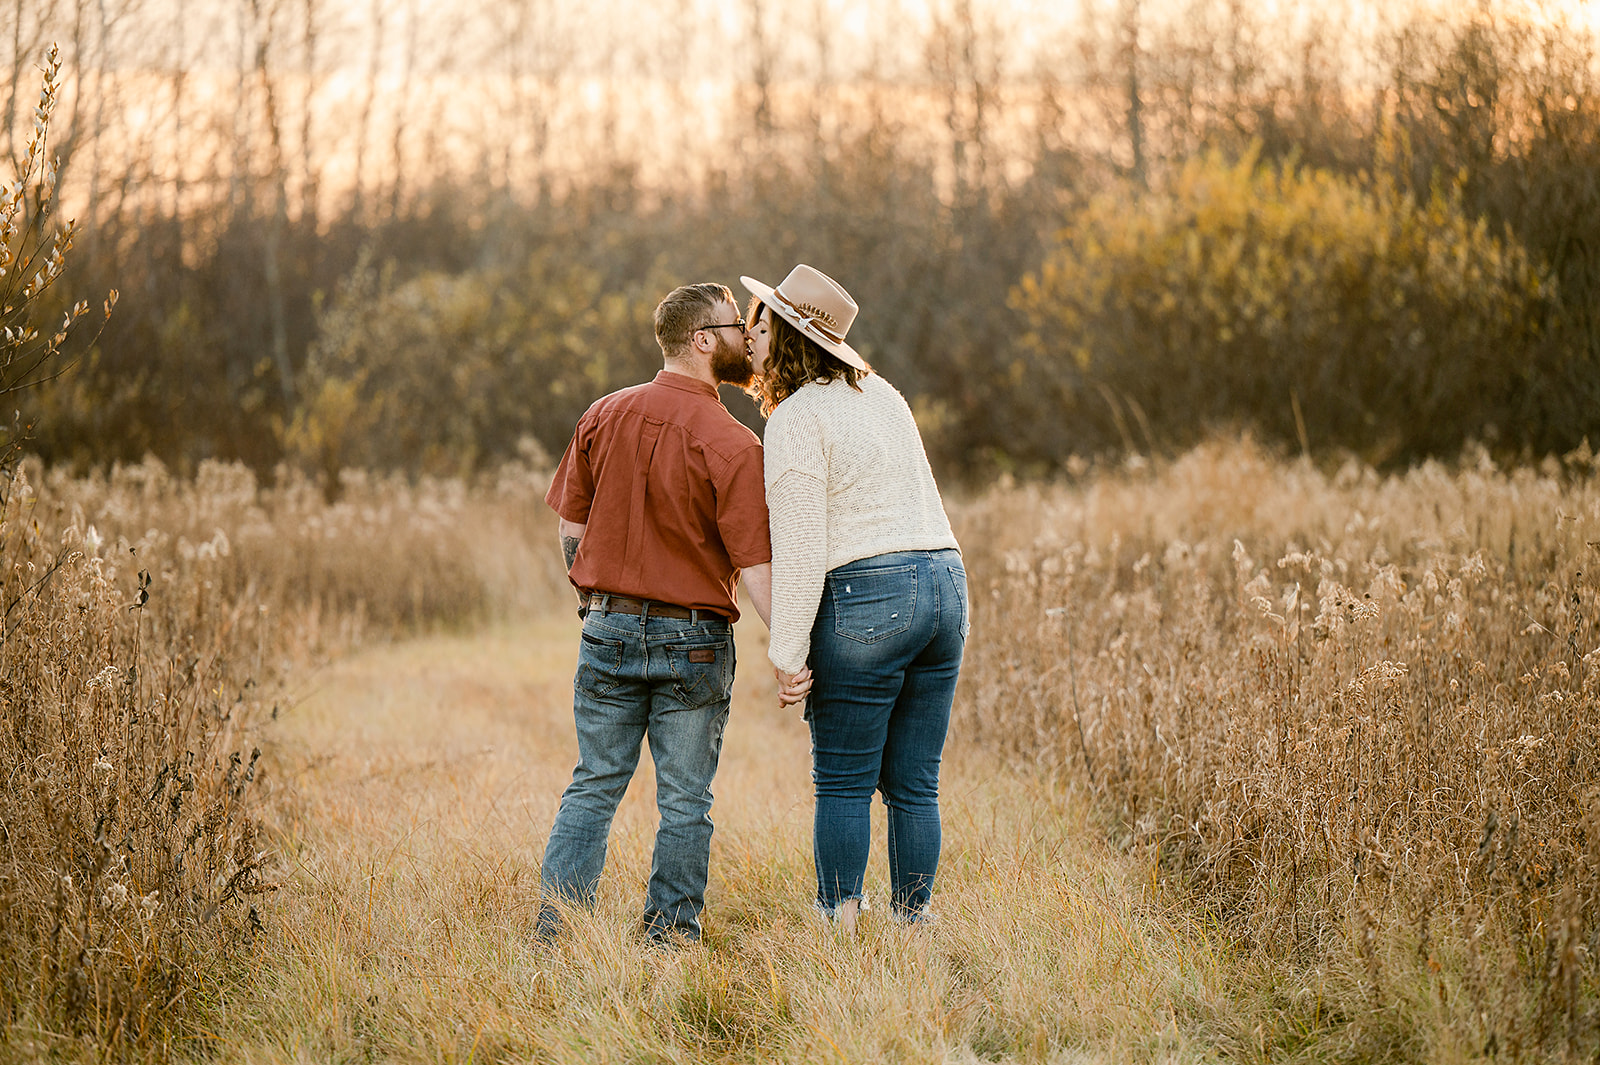 Engagement Sessions | Princeton MN | Nicole Hollenkamp | Couples Photography | Sunset sessions | golden hour